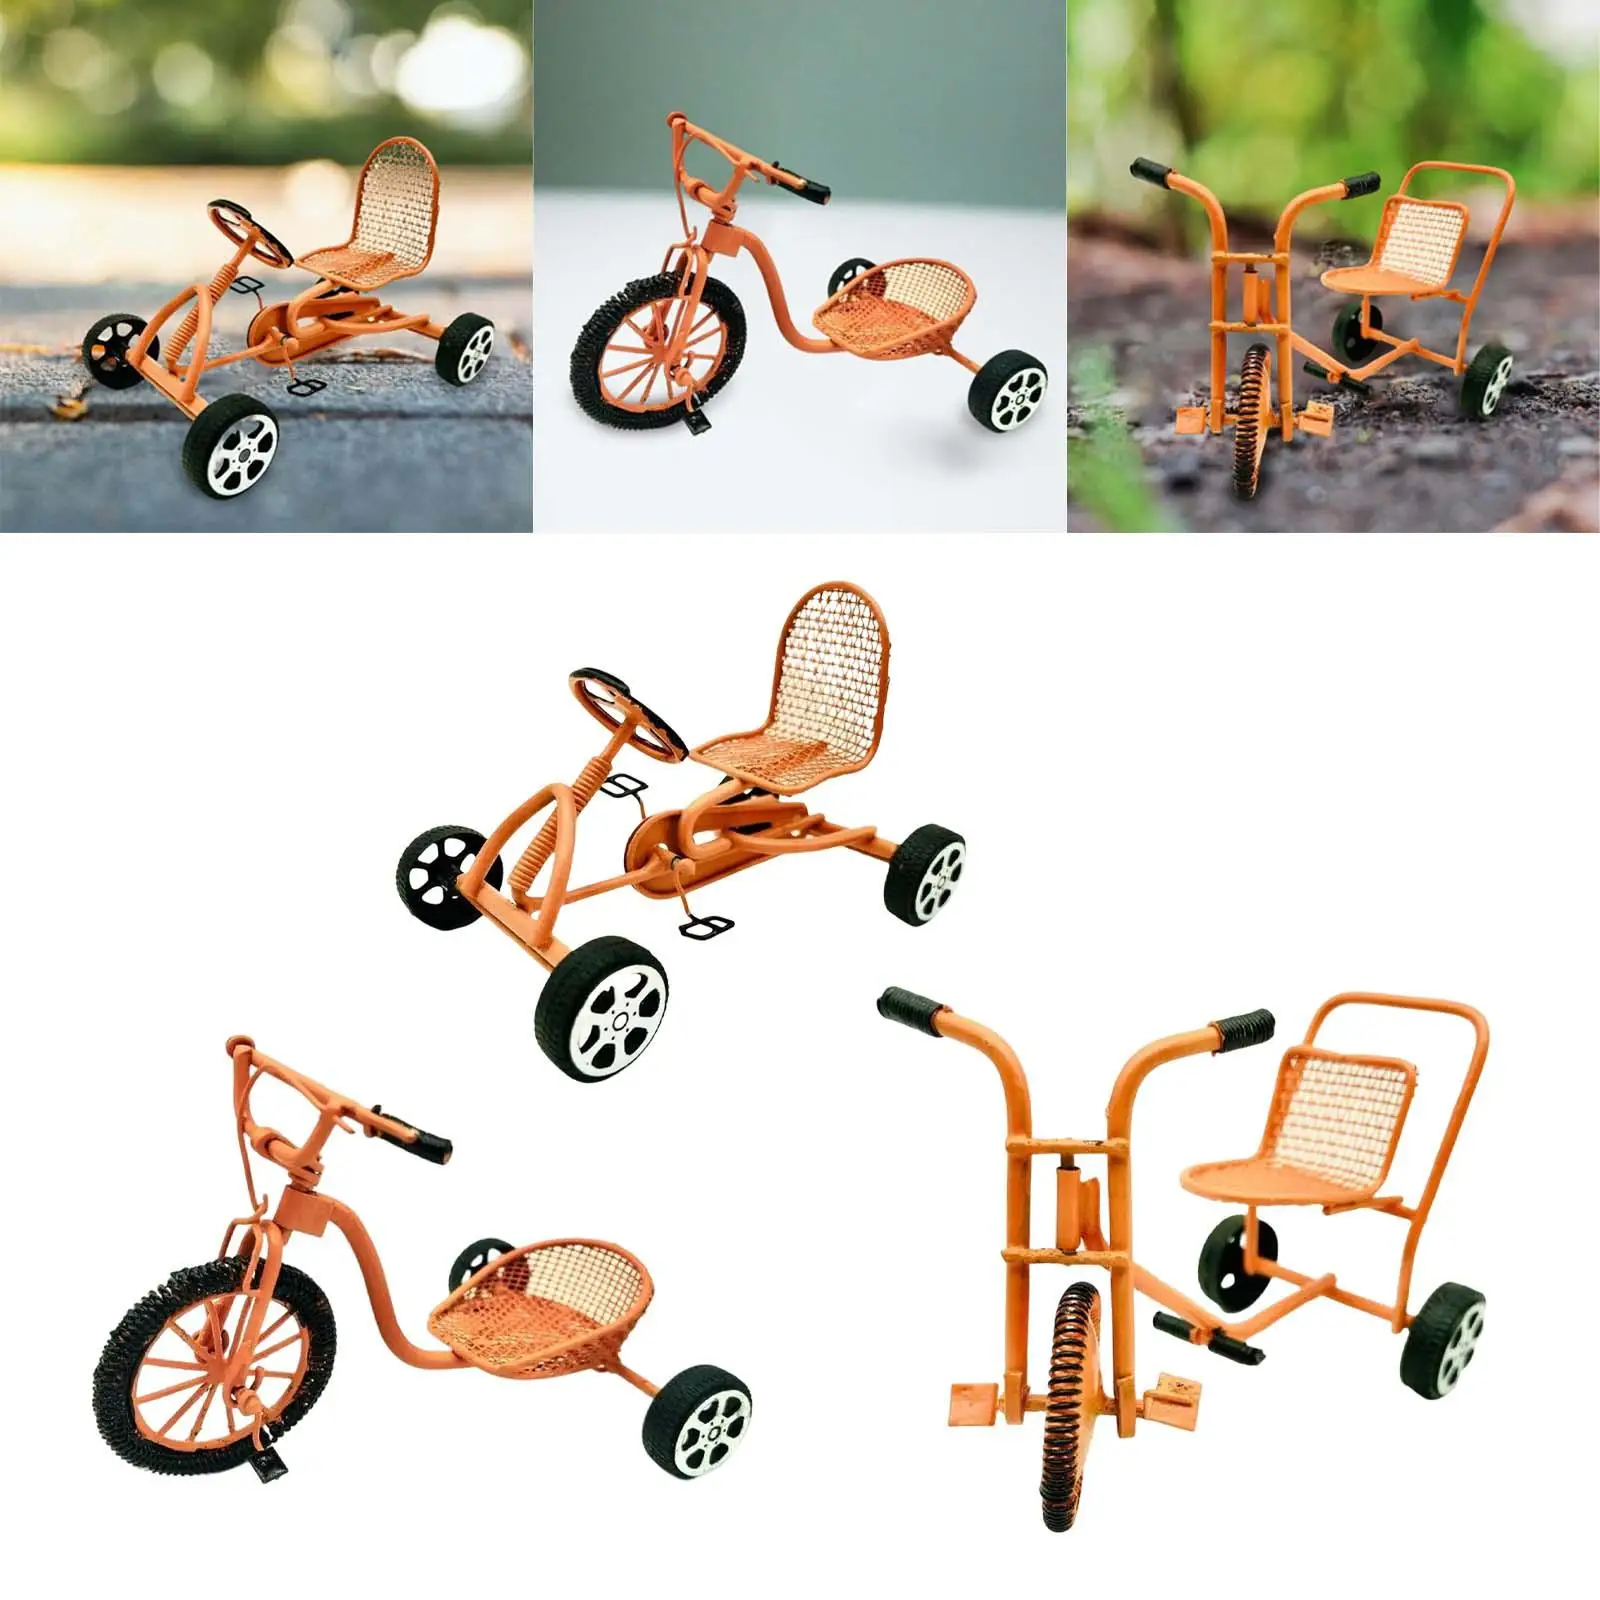 Simulation Mini Tricycle Model Trike 1:12 Dollhouse Decor Accessories Furniture Set Doll House Children Toy